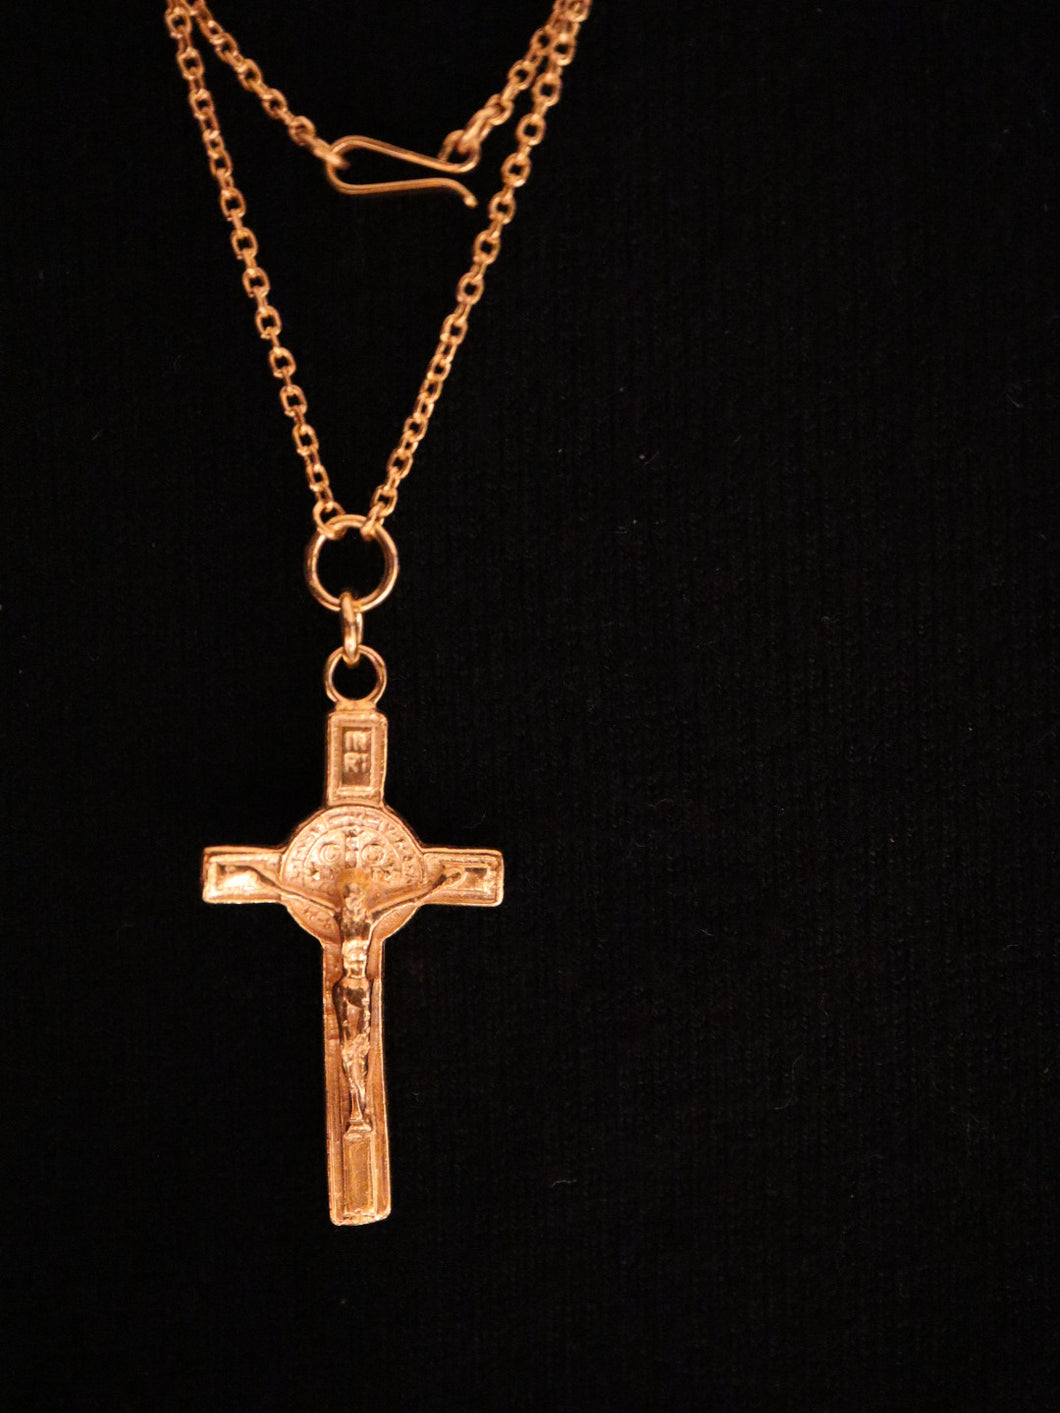 NECKLACE.CALVARY PENDANT ON CHAIN